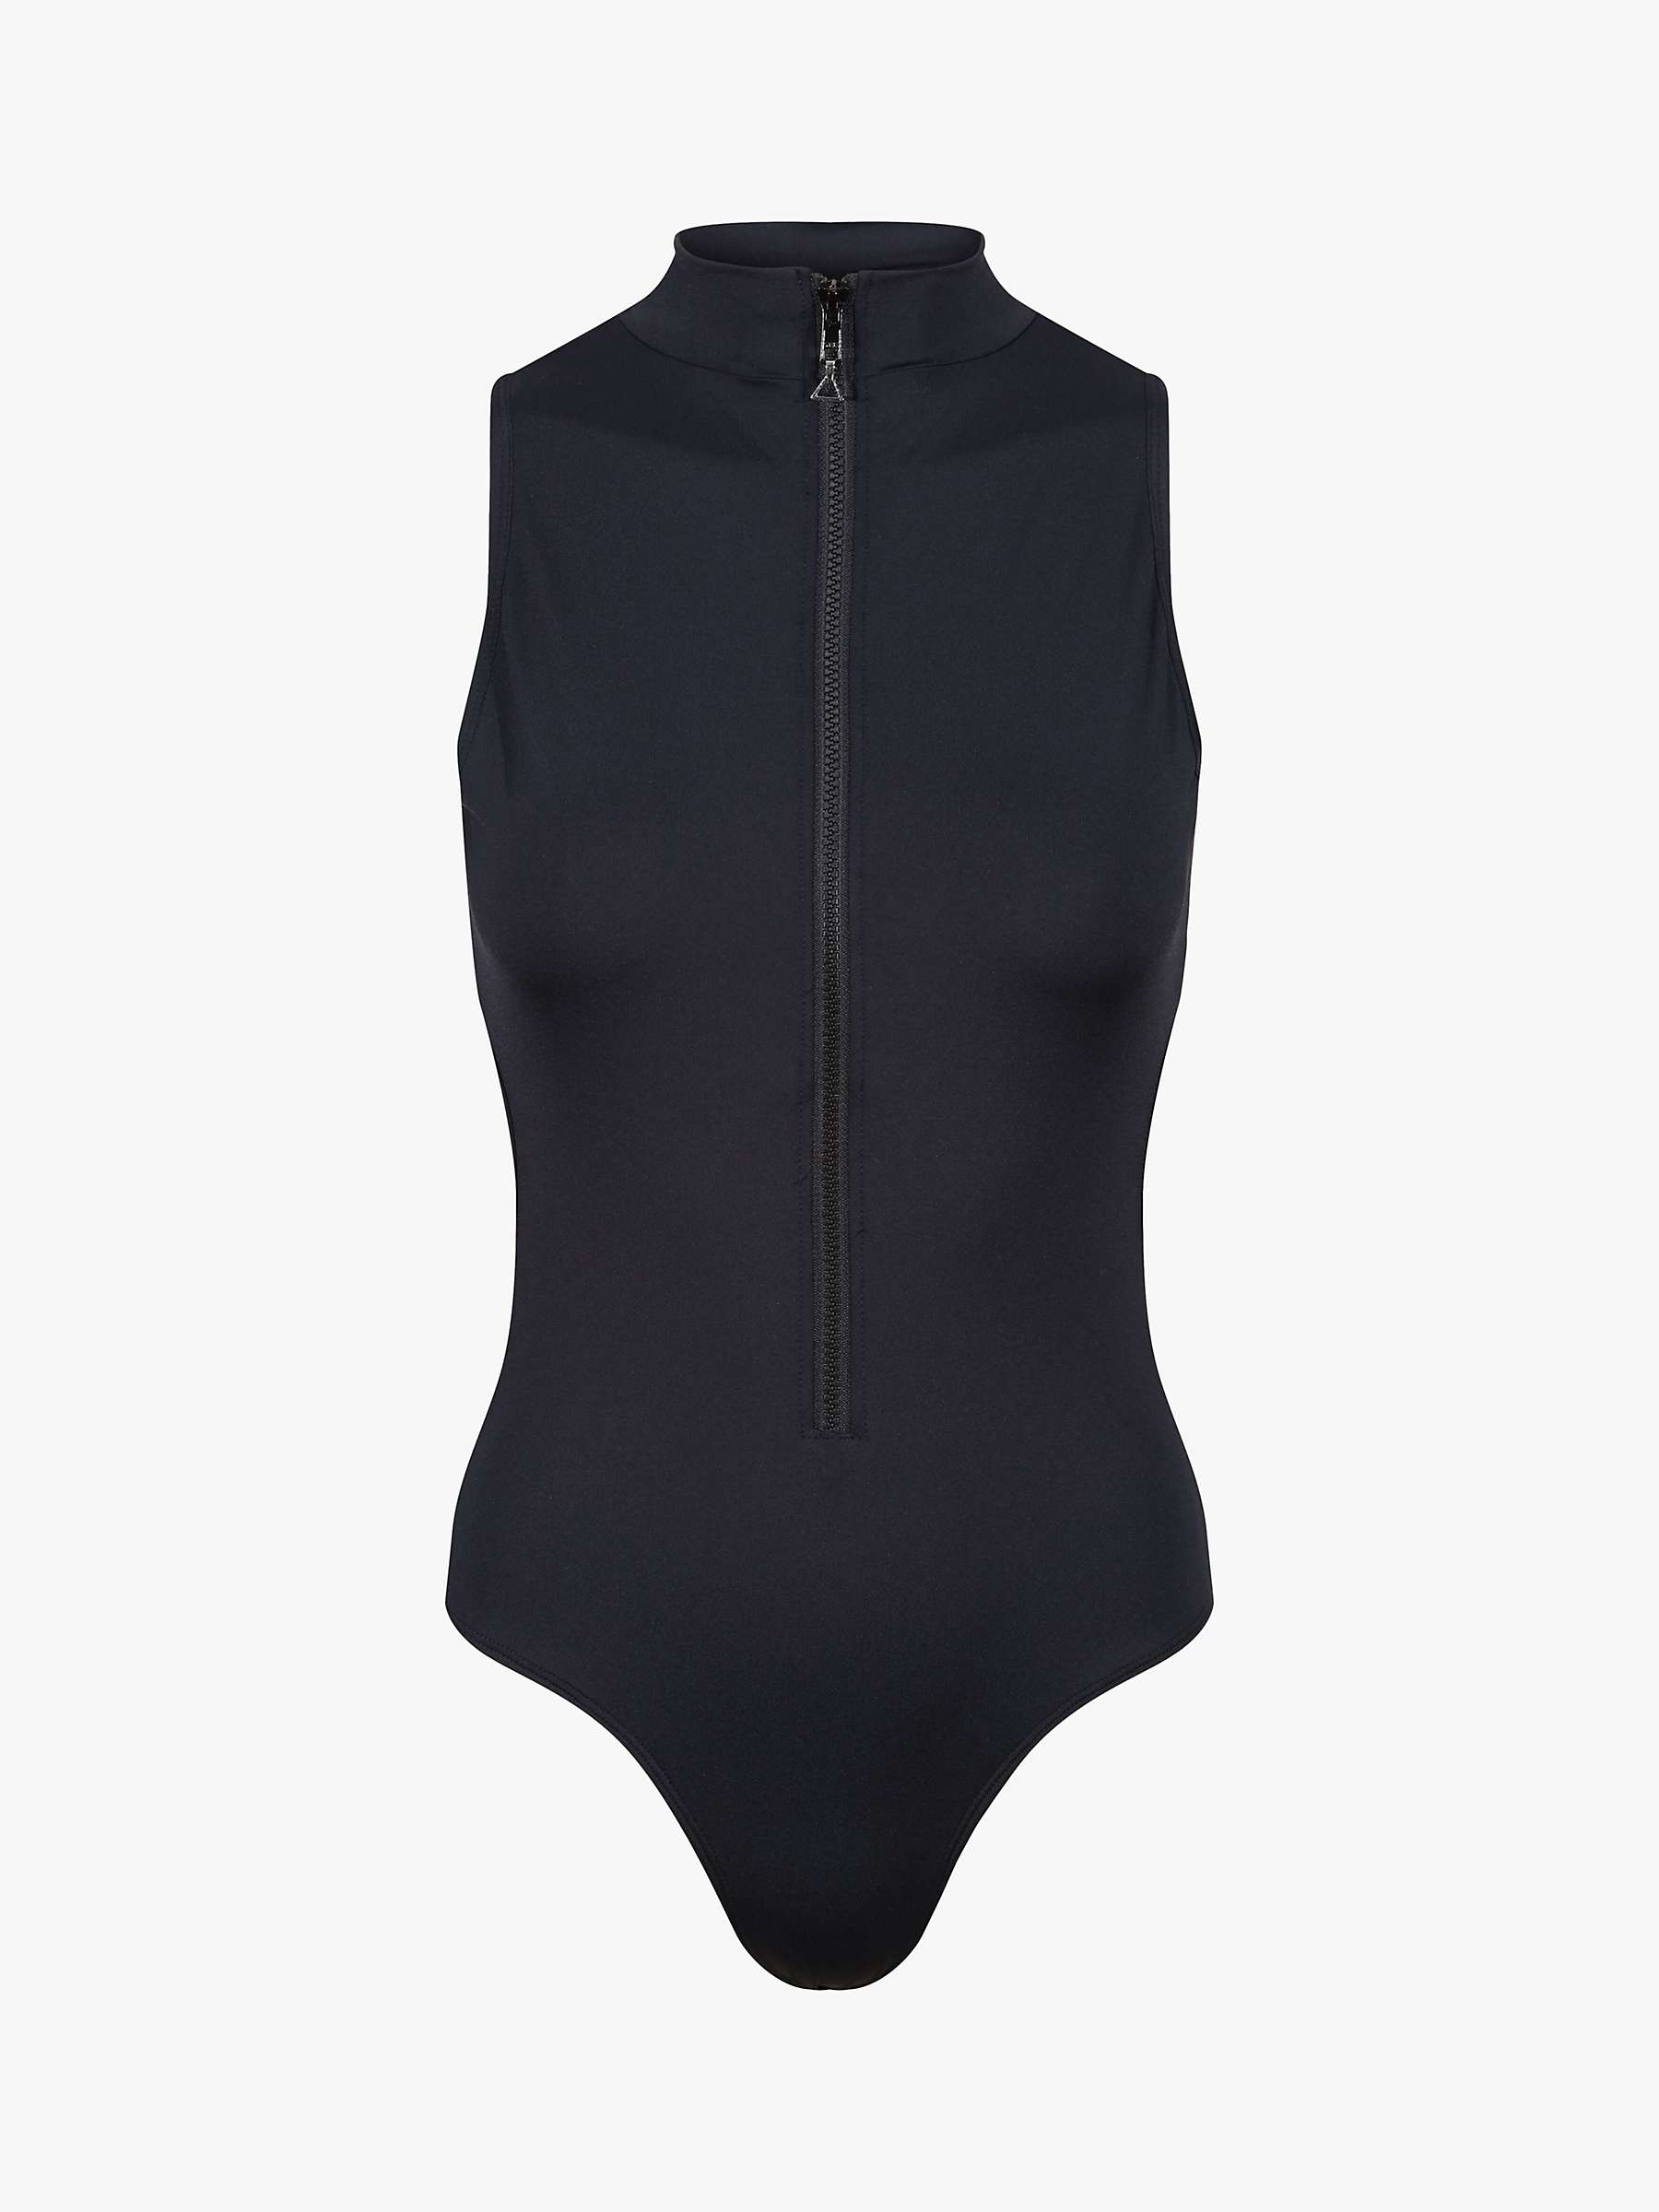 Buy Davy J The Power Cut Out Swimsuit, Black Online at johnlewis.com